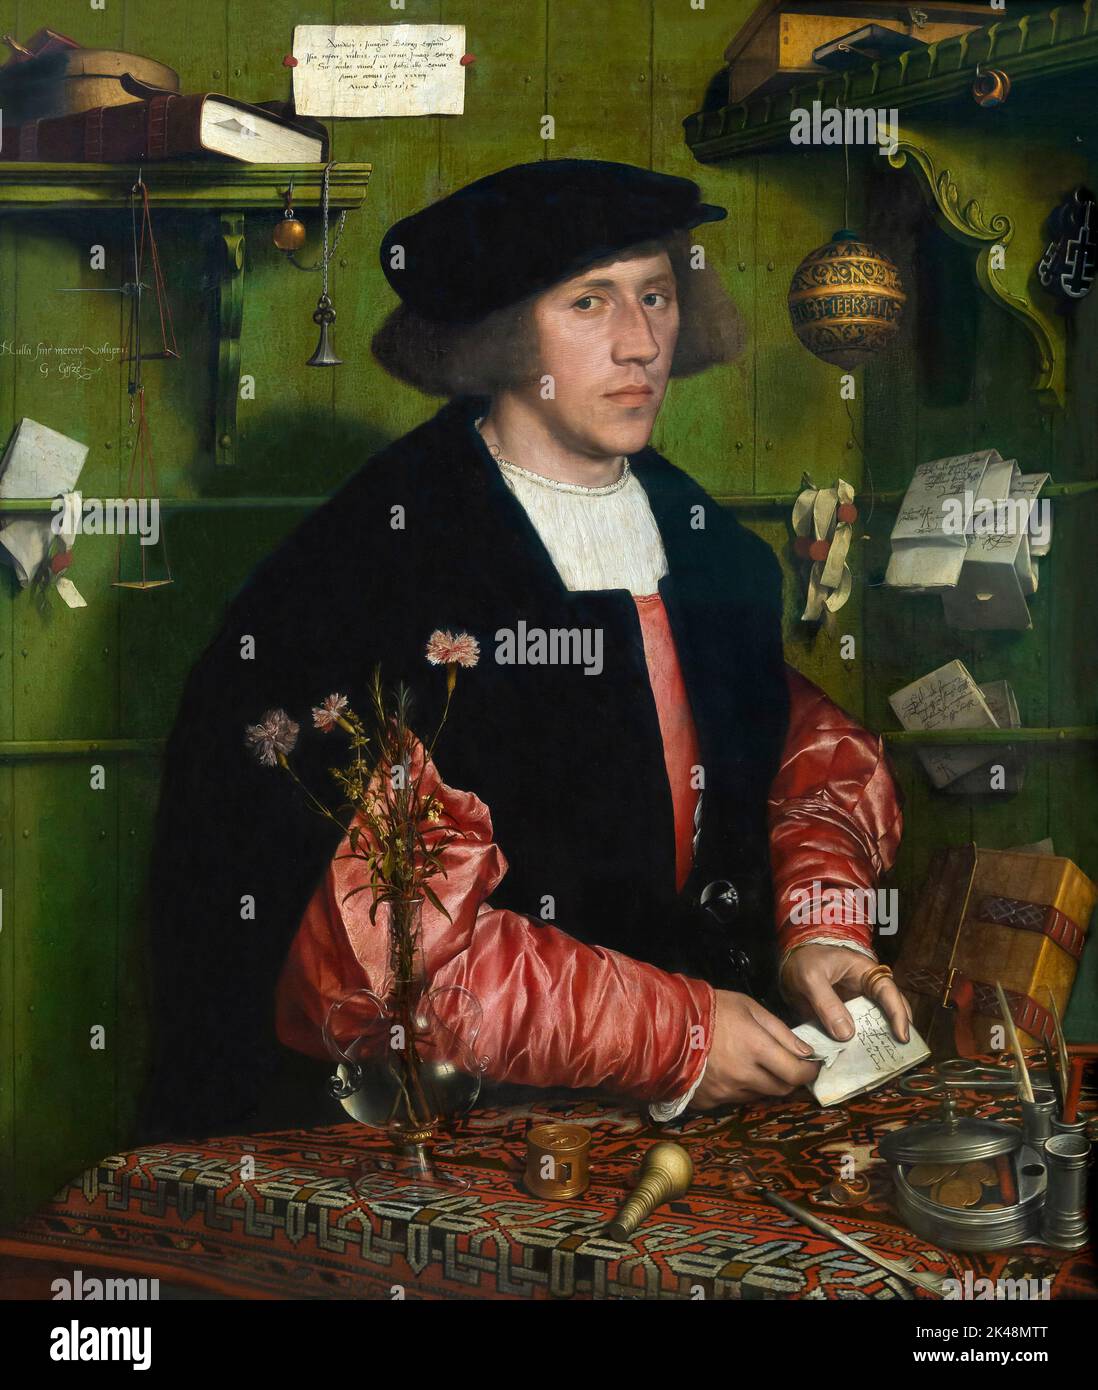 Portrait of the Merchant, Georg Gisze, Hans Holbein the Younger, 1532, Gemaldegalerie, Berlin, Germany, Europe Stock Photo